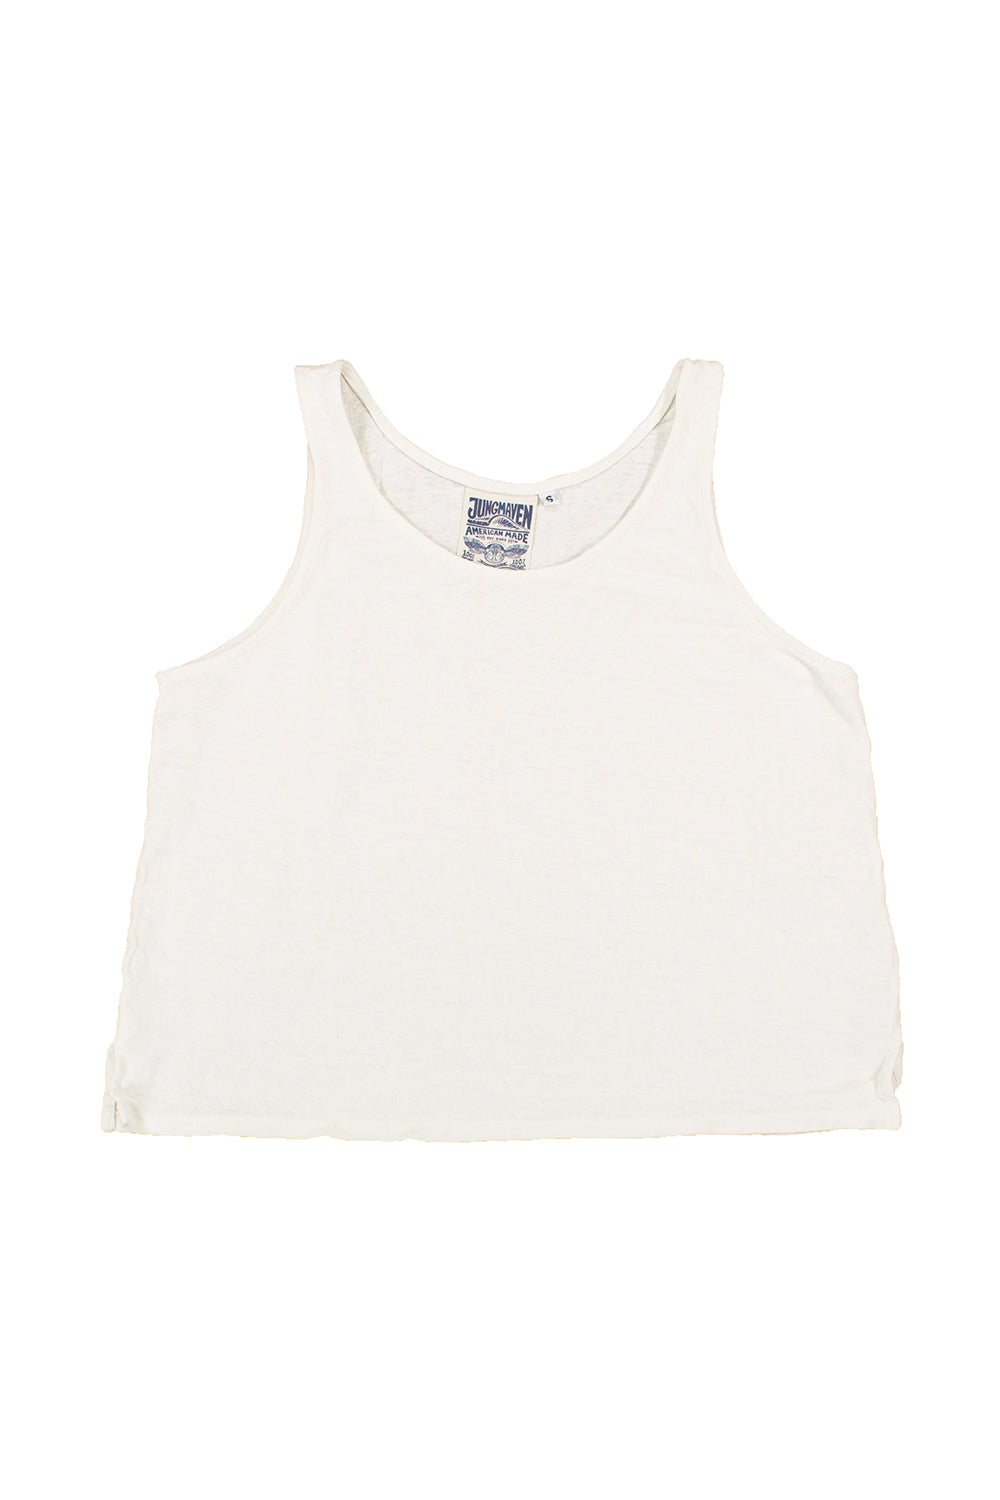 100% Hemp Cropped Tank | Jungmaven Hemp Clothing & Accessories / Color: Washed White